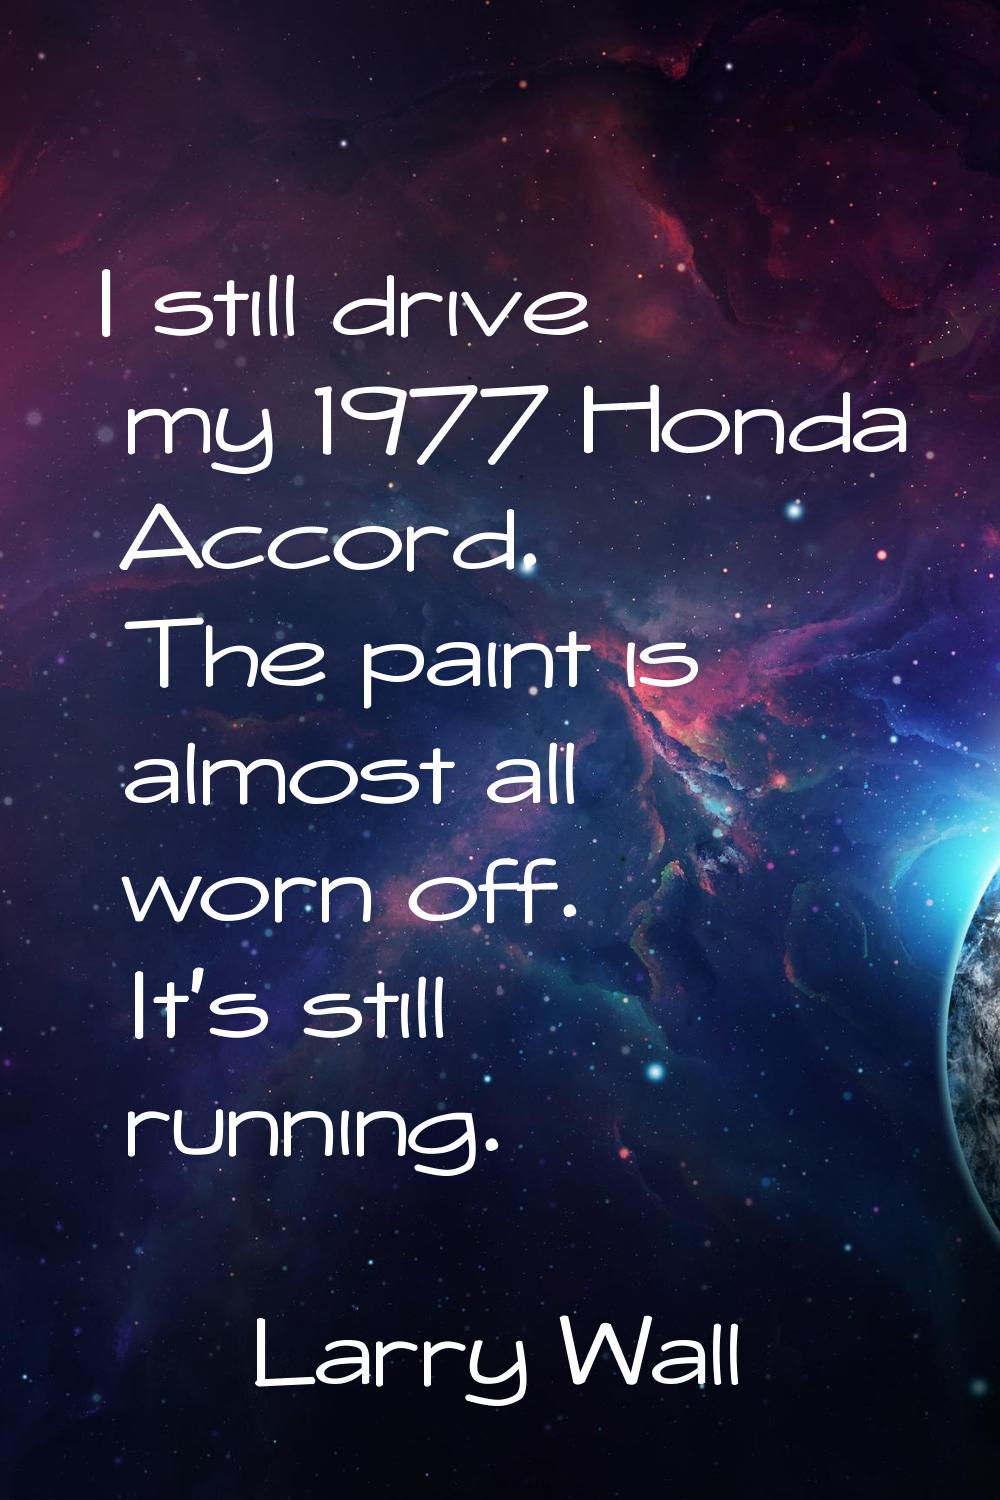 I still drive my 1977 Honda Accord. The paint is almost all worn off. It's still running.